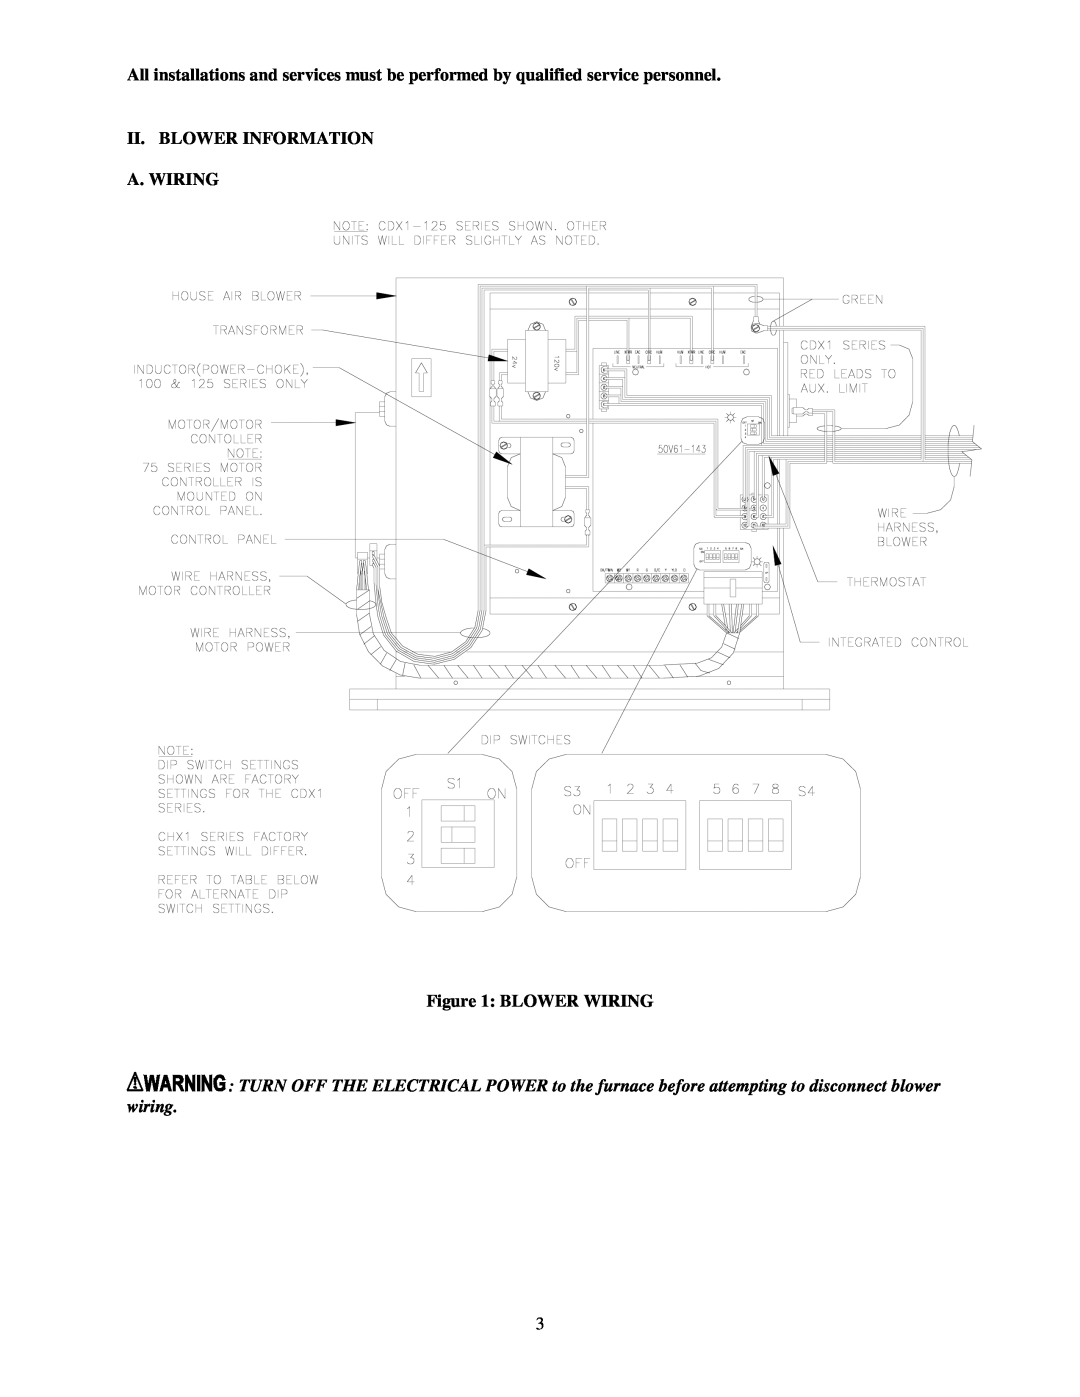 Thermo Products MG-1018 operation manual Ii.Blower Information A. Wiring, Blower Wiring 